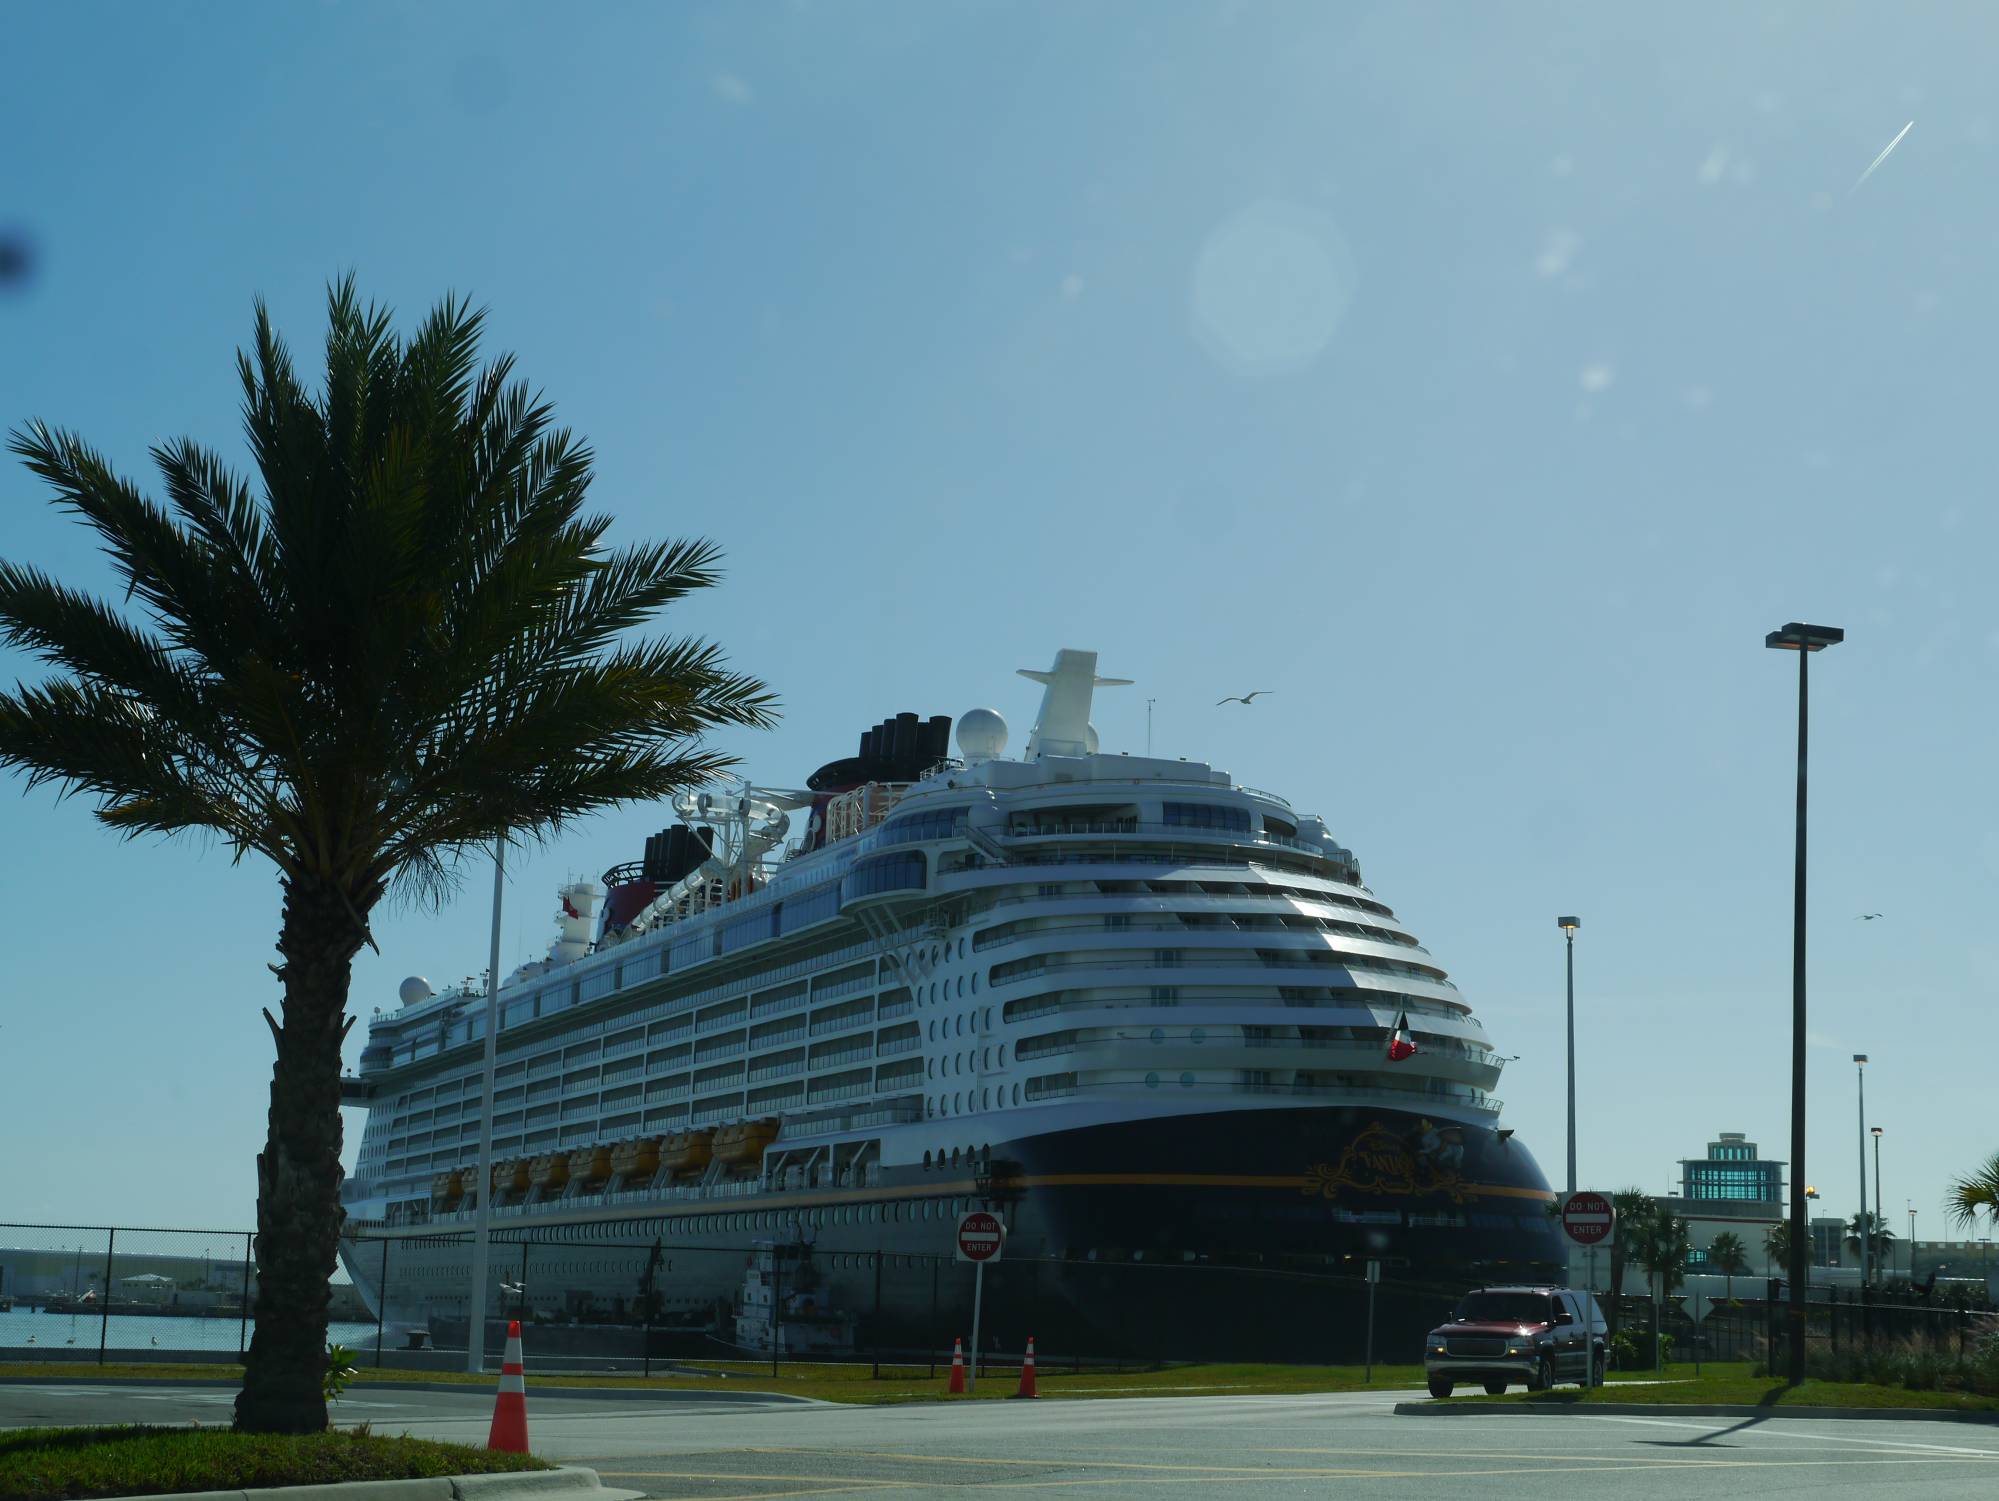 Disney Fantasy - our first view